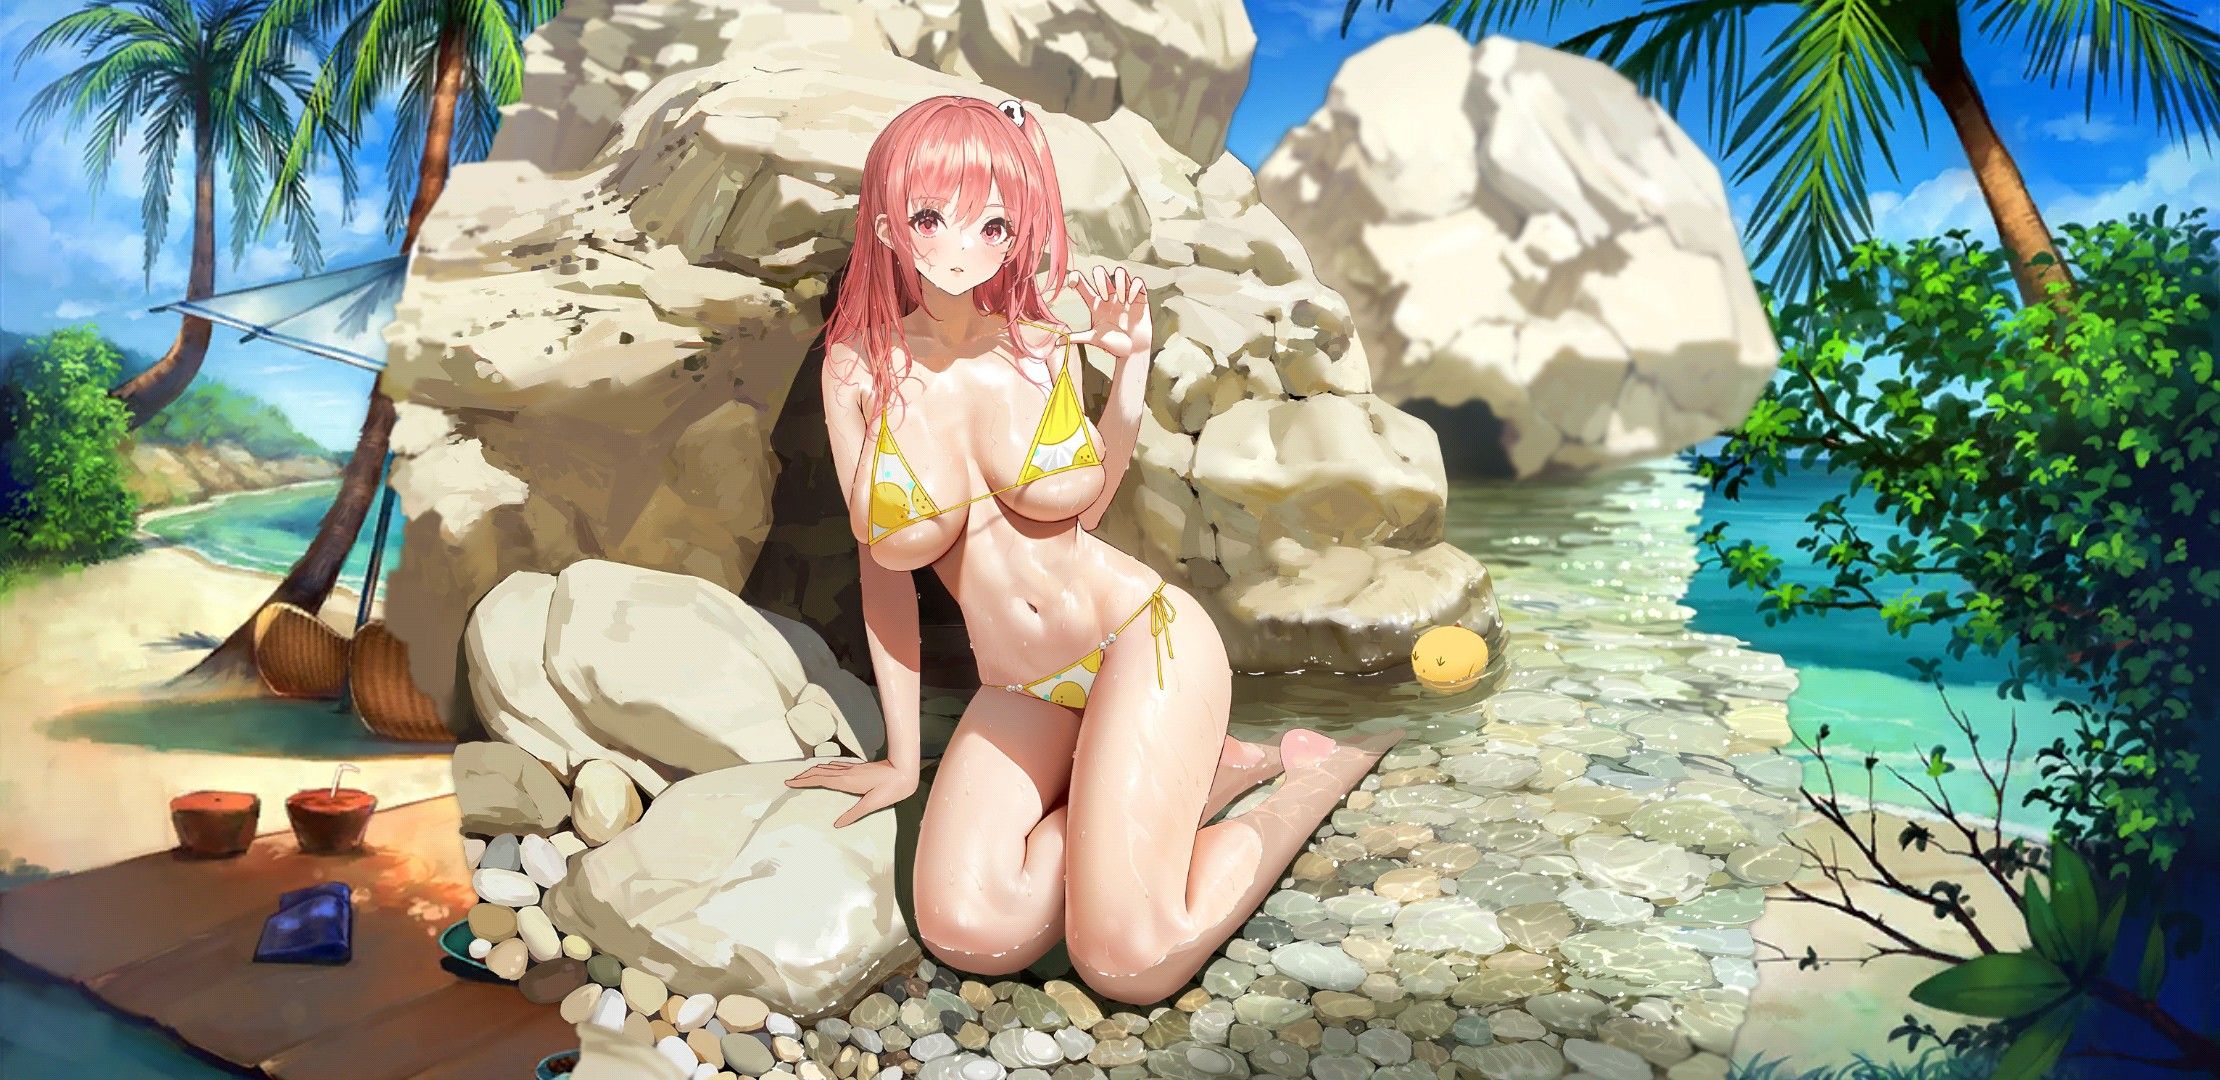 【There is an image】 Smartphone that urges charging with erotic swimsuits is malicious 10